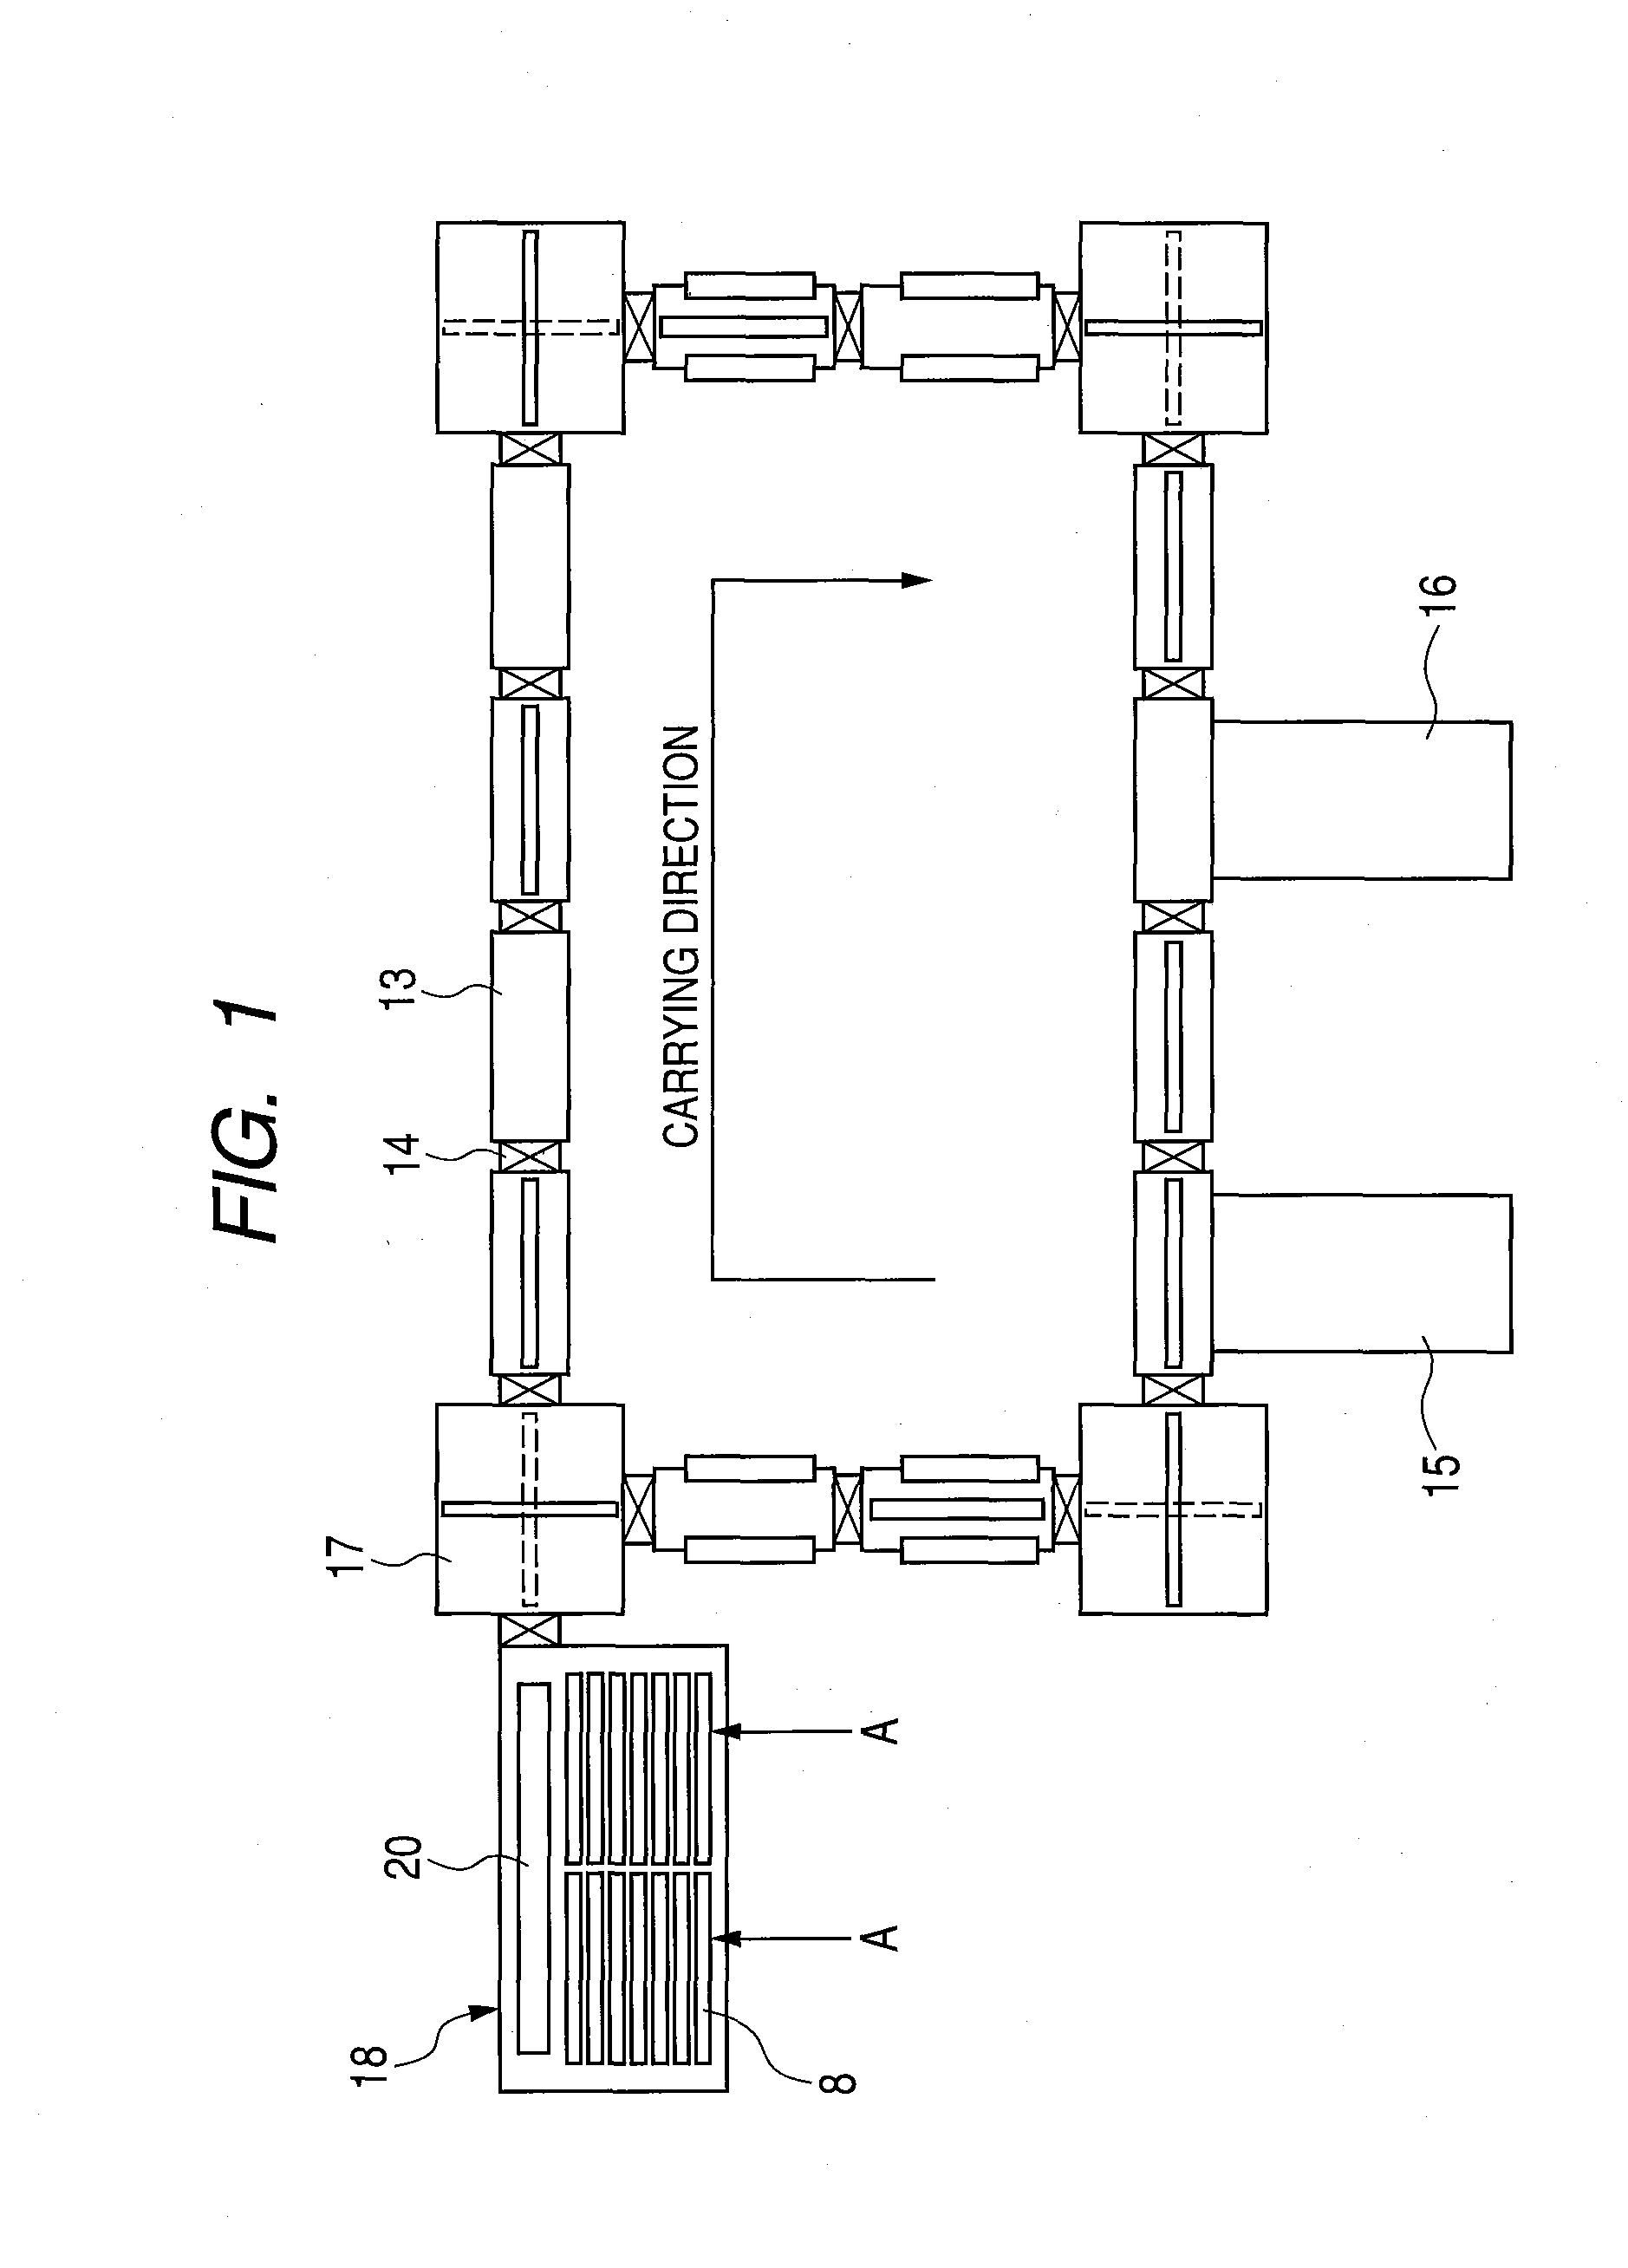 Substrate holder mounting device and substrate holder container chamber